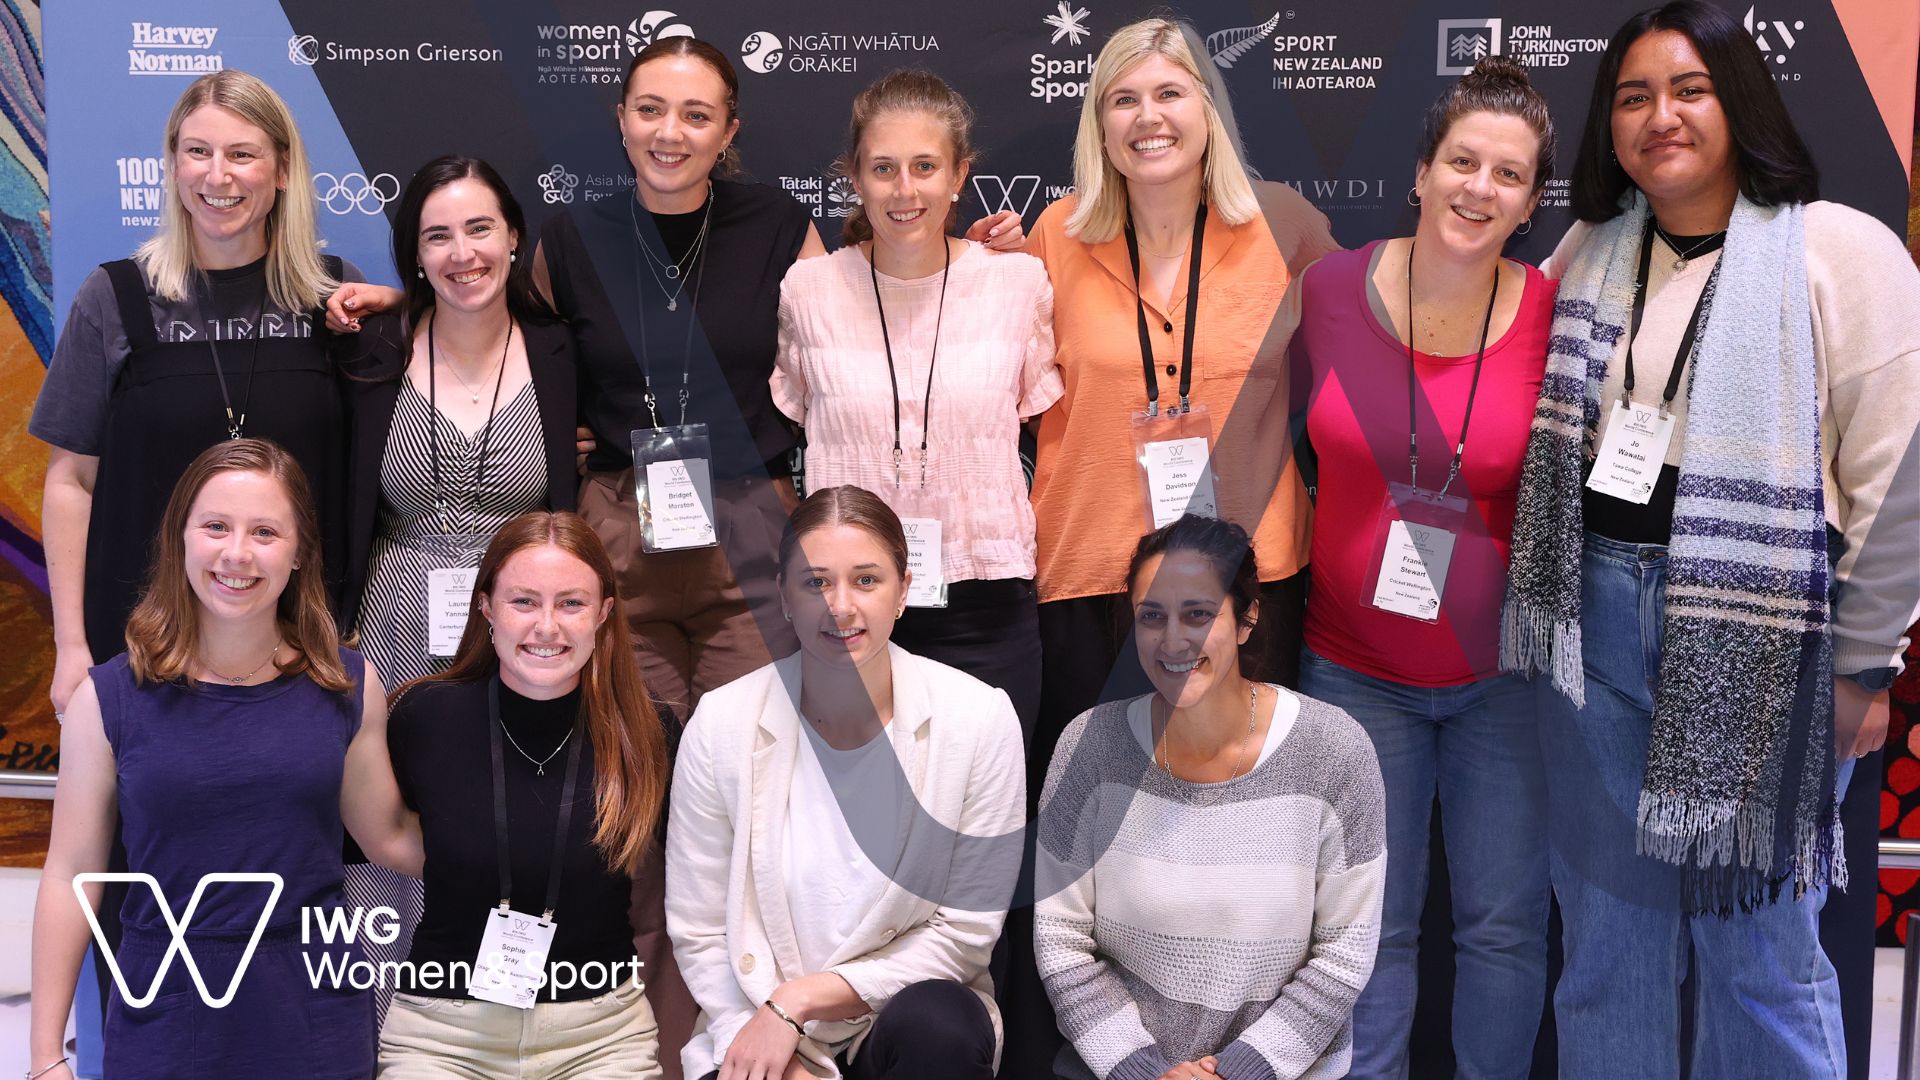 A large group of women stand against a branded backdrop and smile at the camera at the IWG Women and Sport Conference in New Zealand, 2022